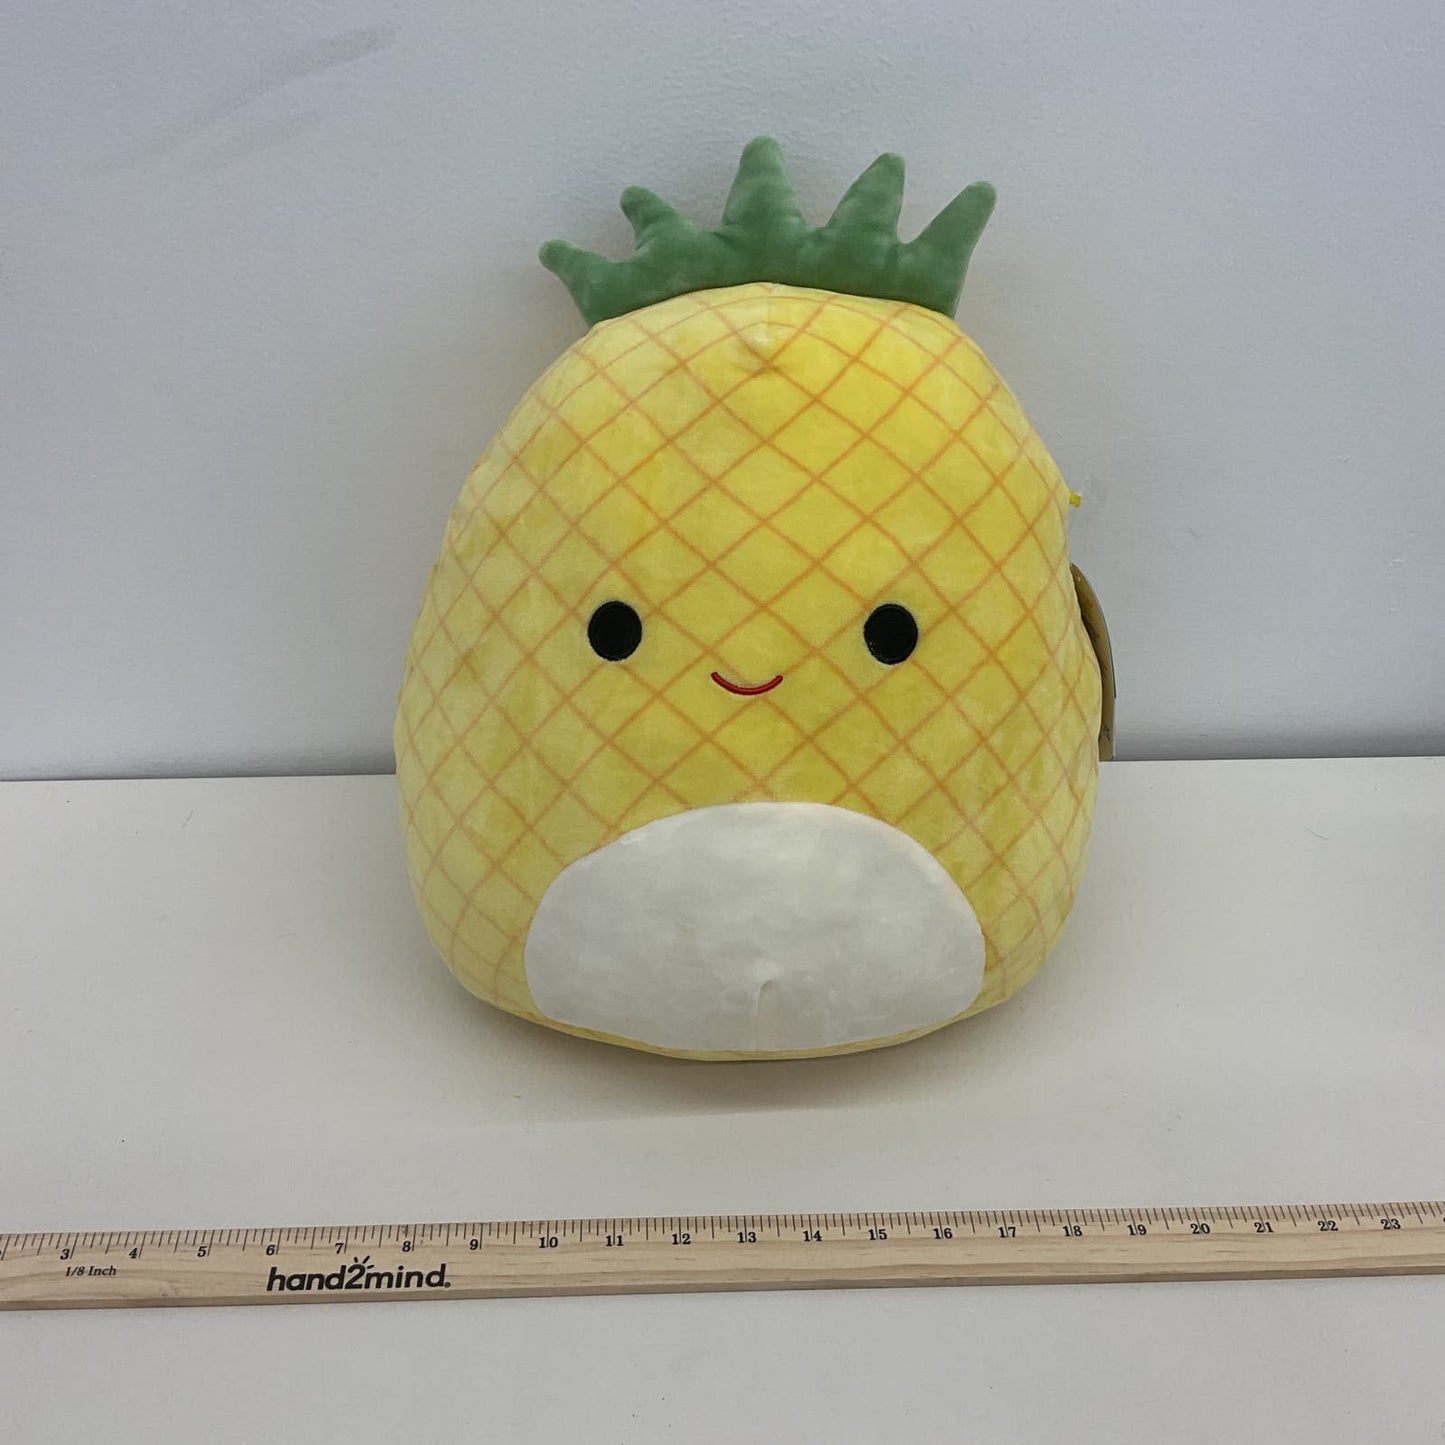 NWT Squishmallows Soft Cuddly Yellow Pineapple Plush Pillow Toy 14" Tall - Warehouse Toys